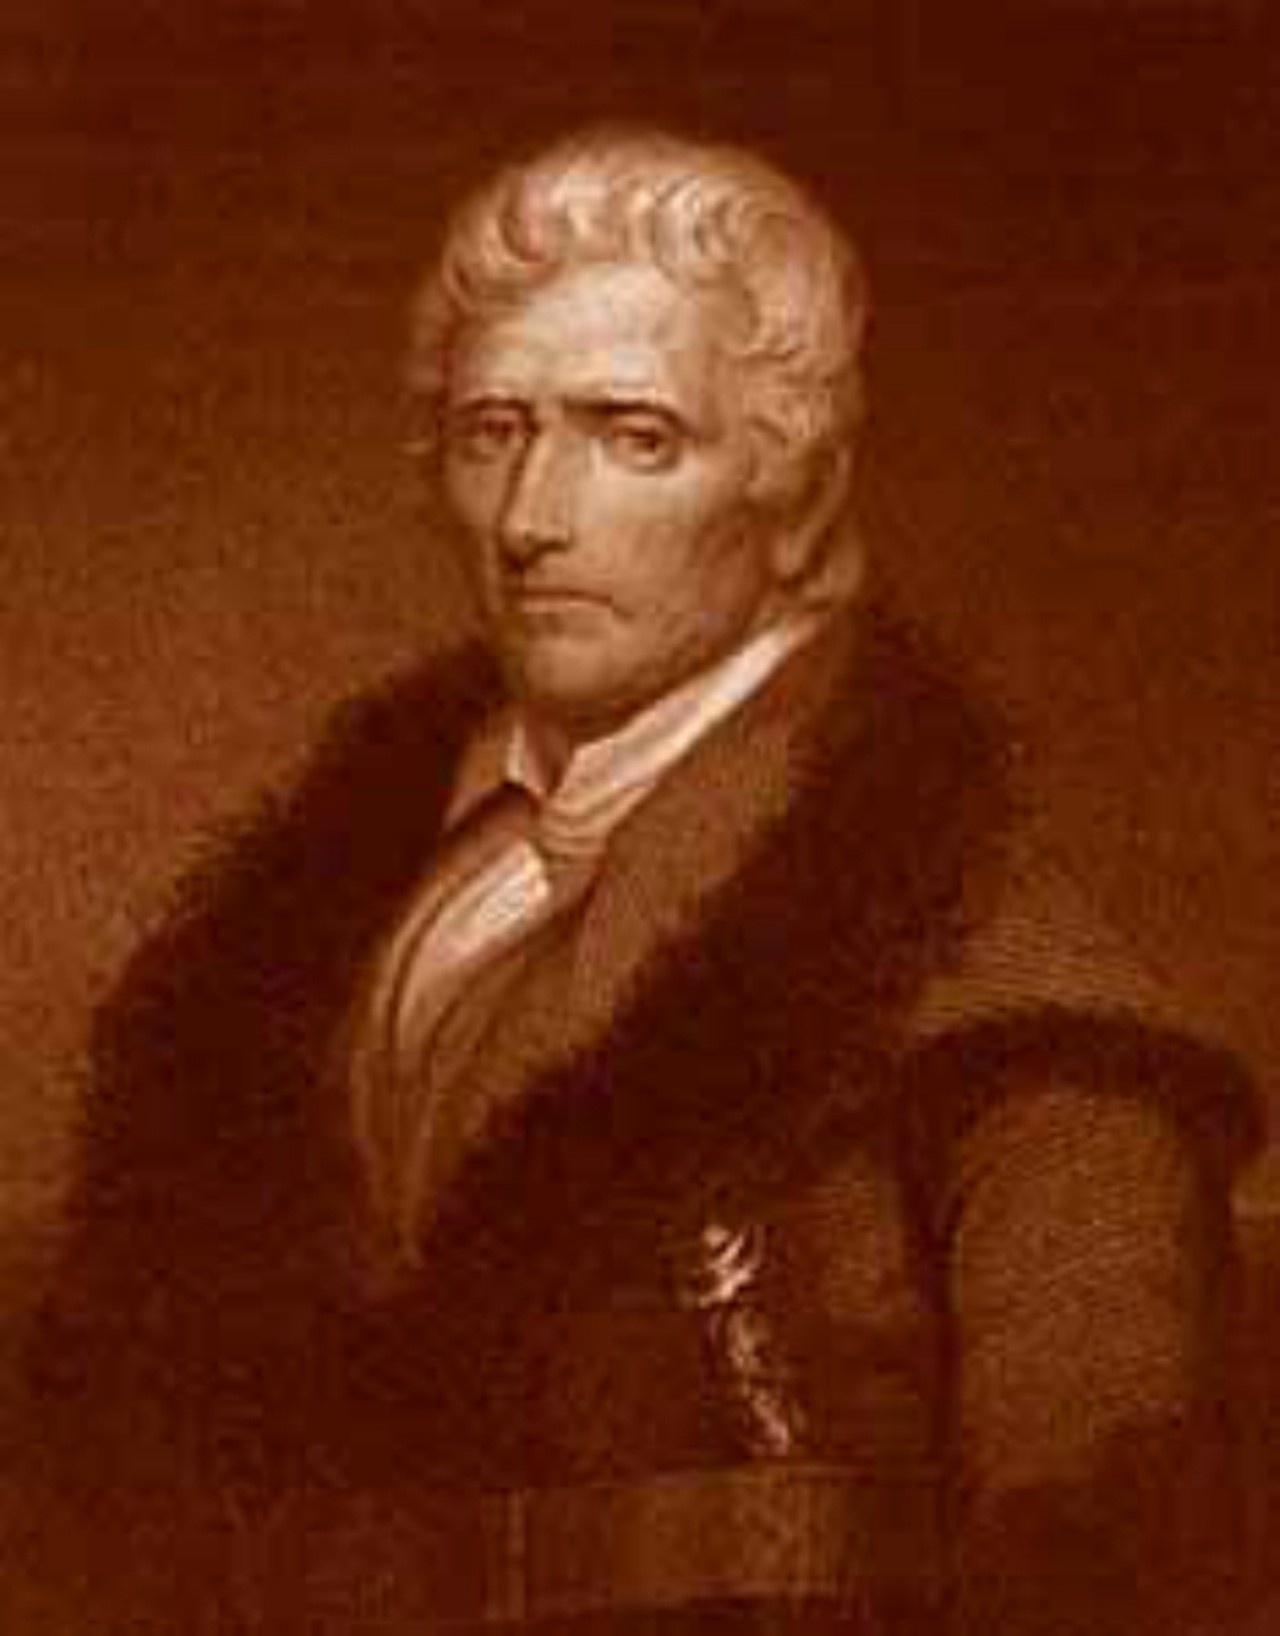 Daniel Boone
One of the most famous explorers in history, Boone is buried in Marthasville.
Photo credit: Wikimedia Commons